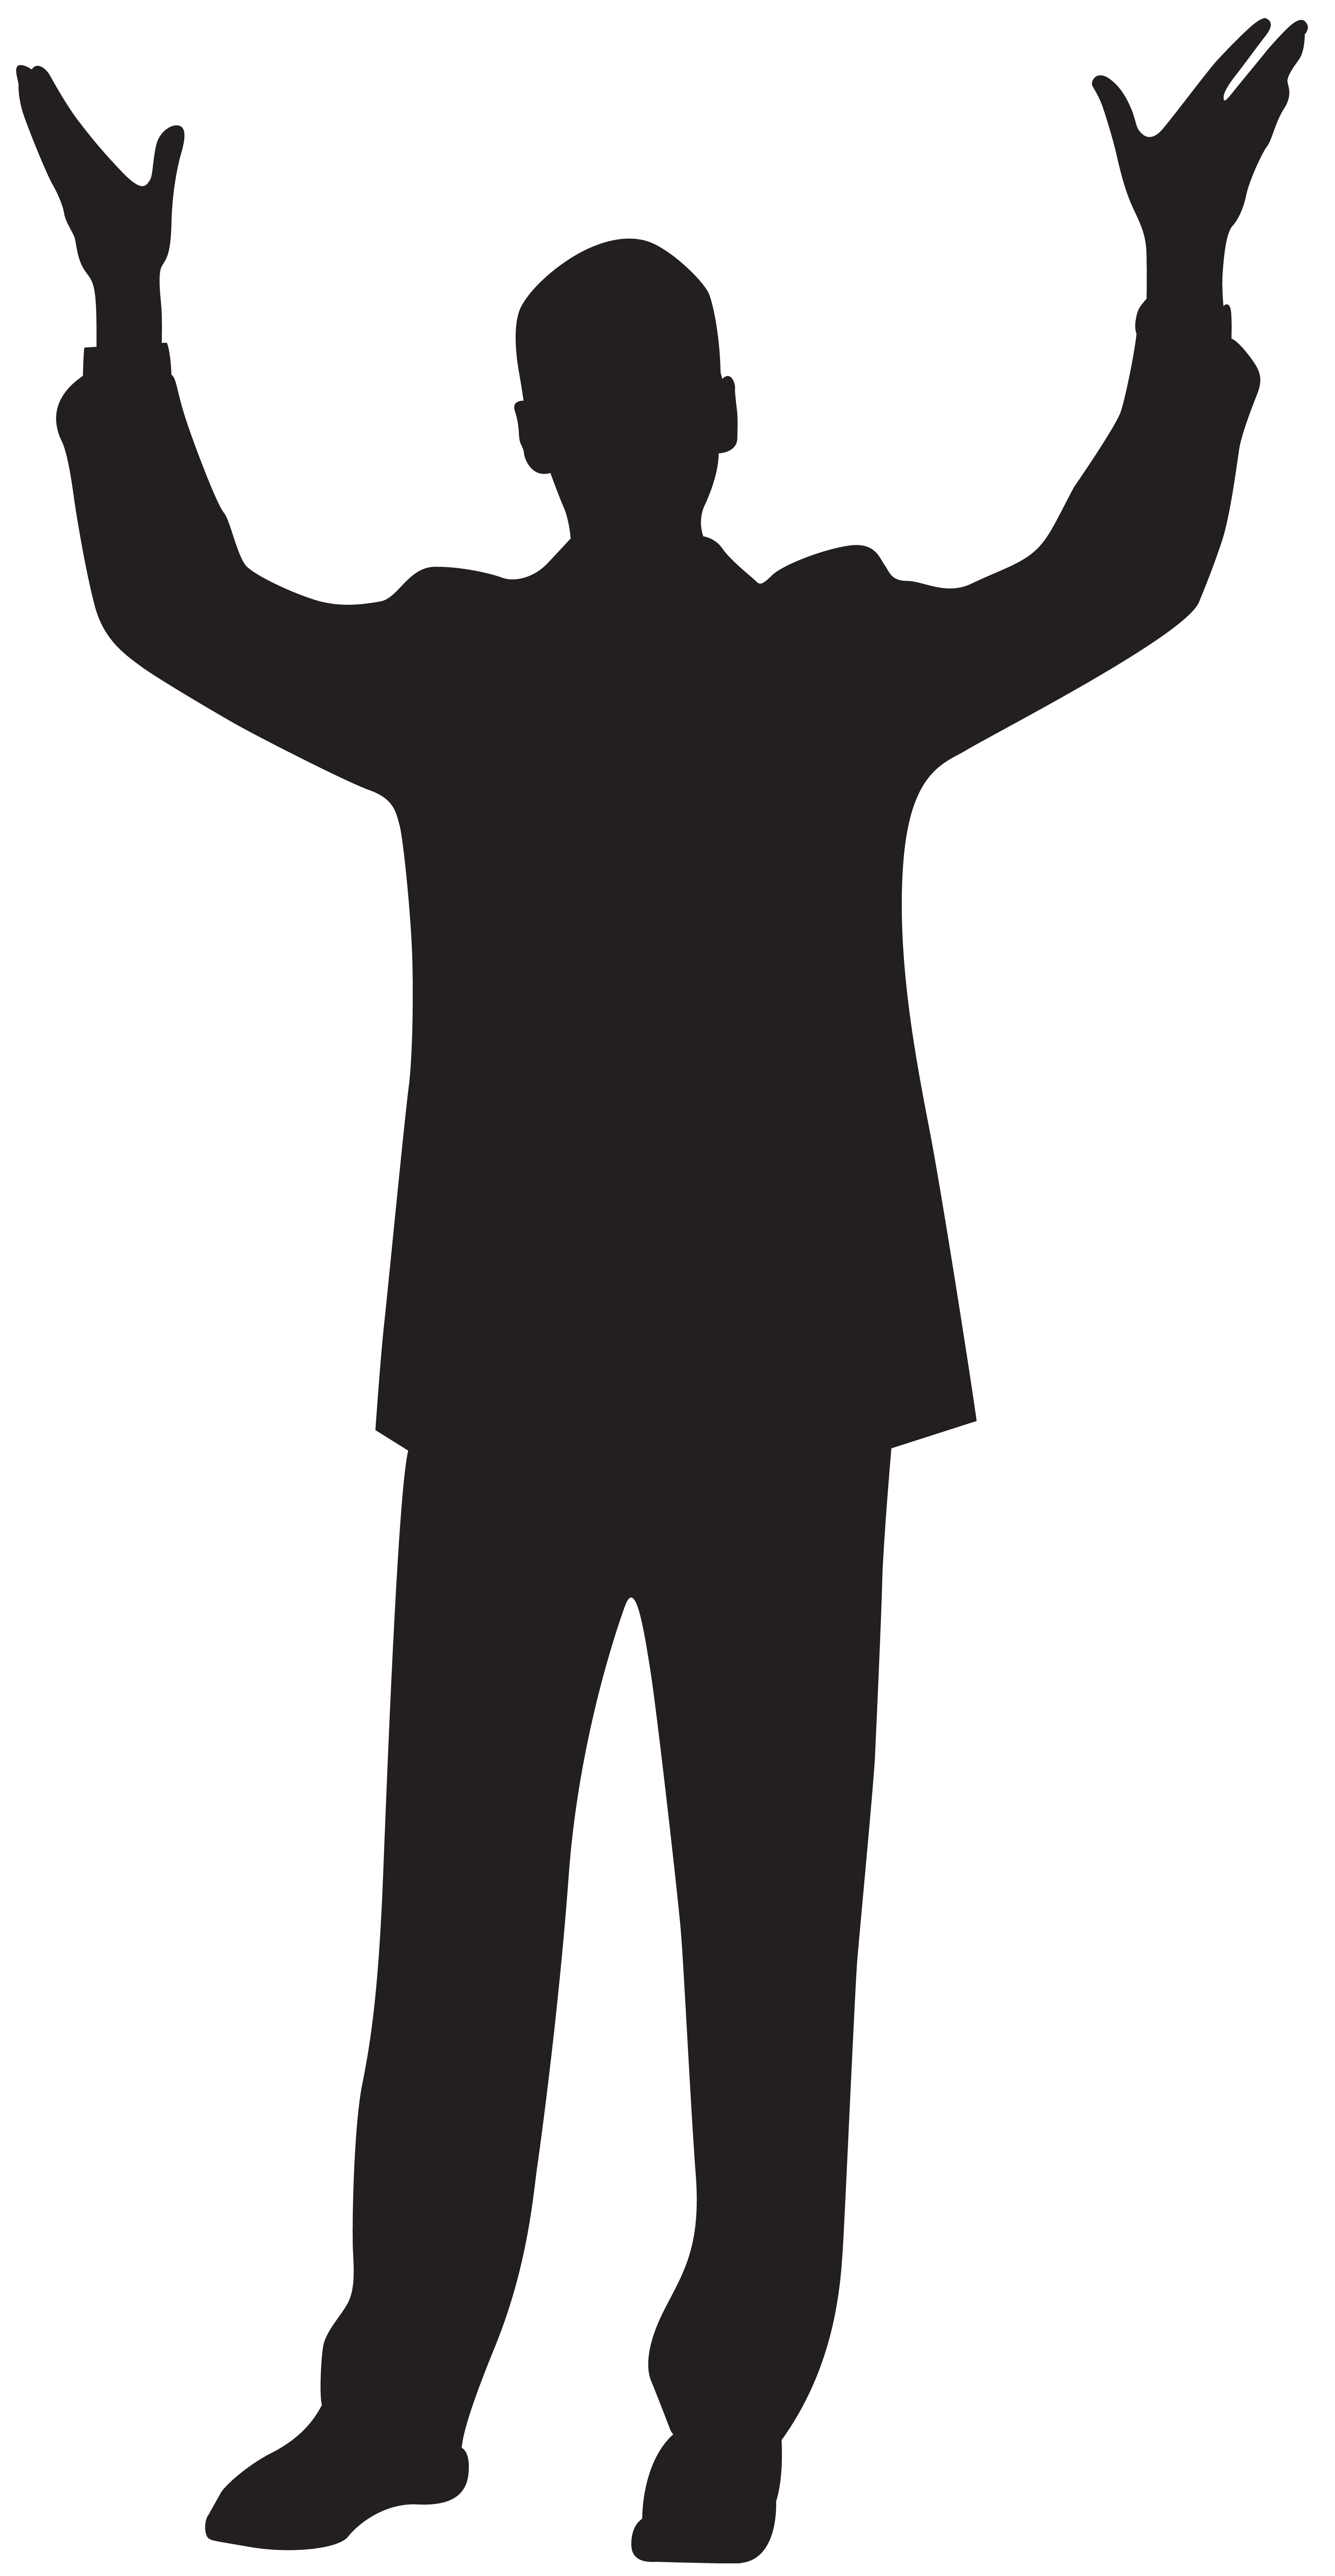 With hands up silhouette. Clipart walking tall man